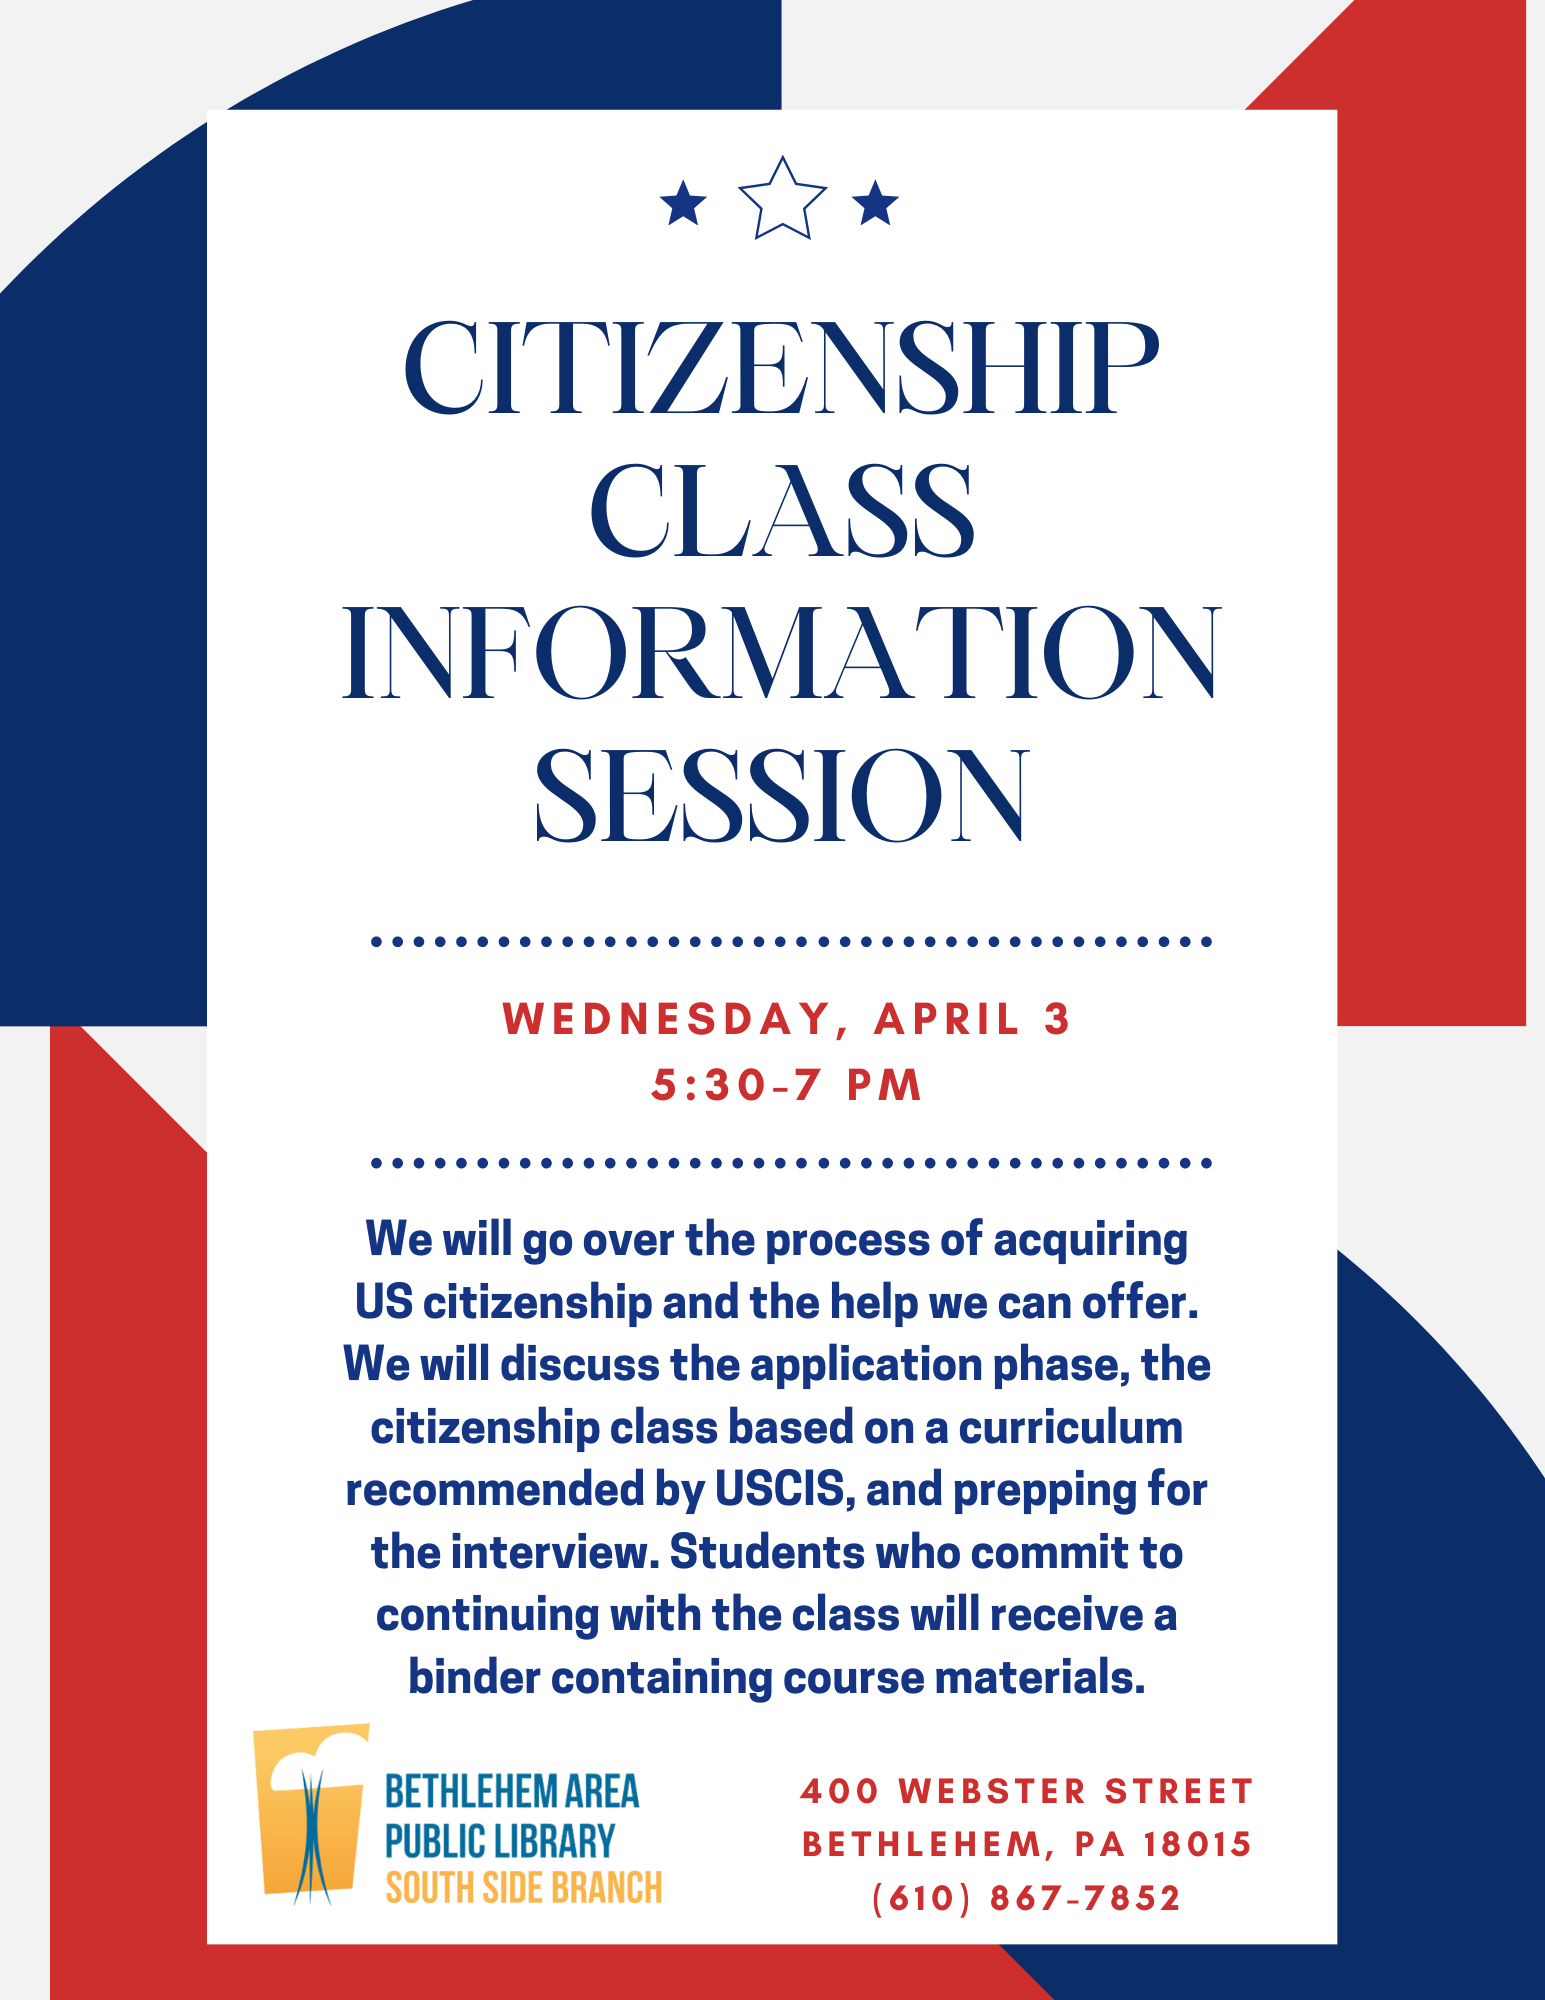 Citizenship Class: Information Session, Wednesday April 3 5:30 - 6:30 pm, We will go over the process of acquiring US citizenship and the help we can offer. We will discuss the application phase, the citizenship class based on a curriculum recommended by USCIS, and prepping for the interview. Students who commit to continuing with the class will receive a binder containing course materials.